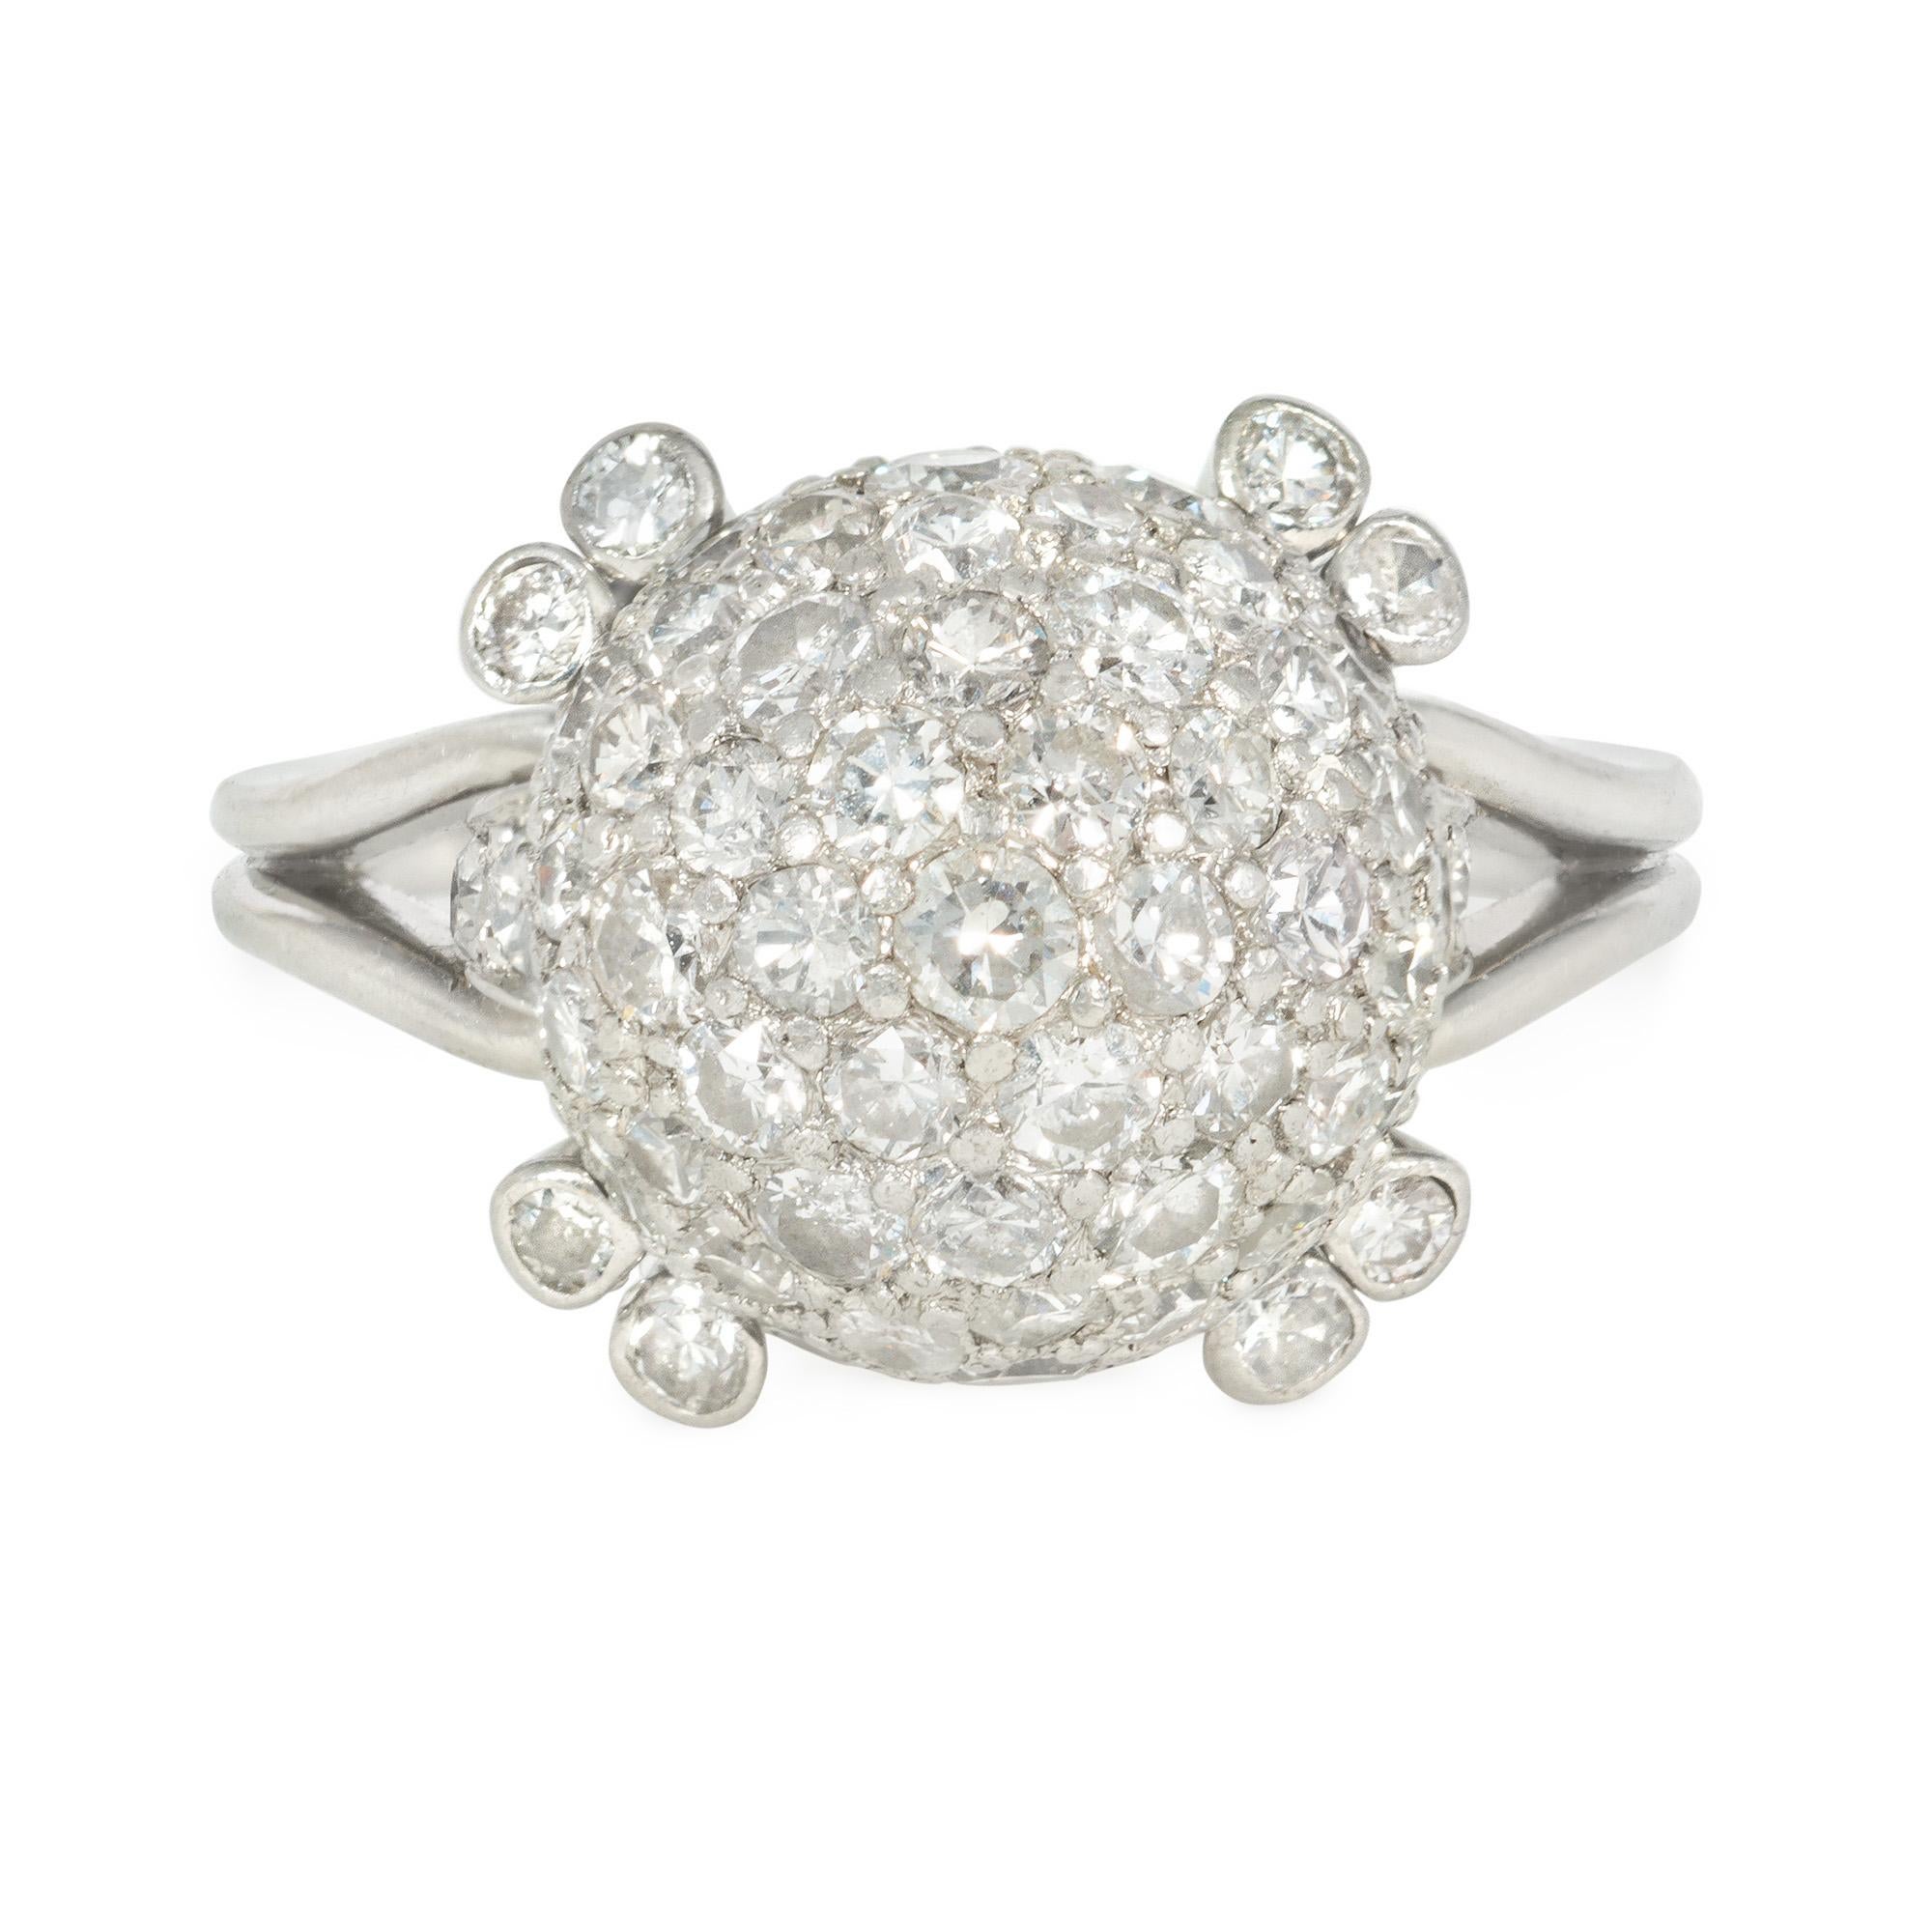 An Art Deco diamond ring centered by a pavé-set diamond sphere supported by pairs of collet-set diamonds at each corner, with diamond accented shoulders and a double-looped band, in platinum.  Atw 1.50 cts.  Diameter of diamond ball approximately